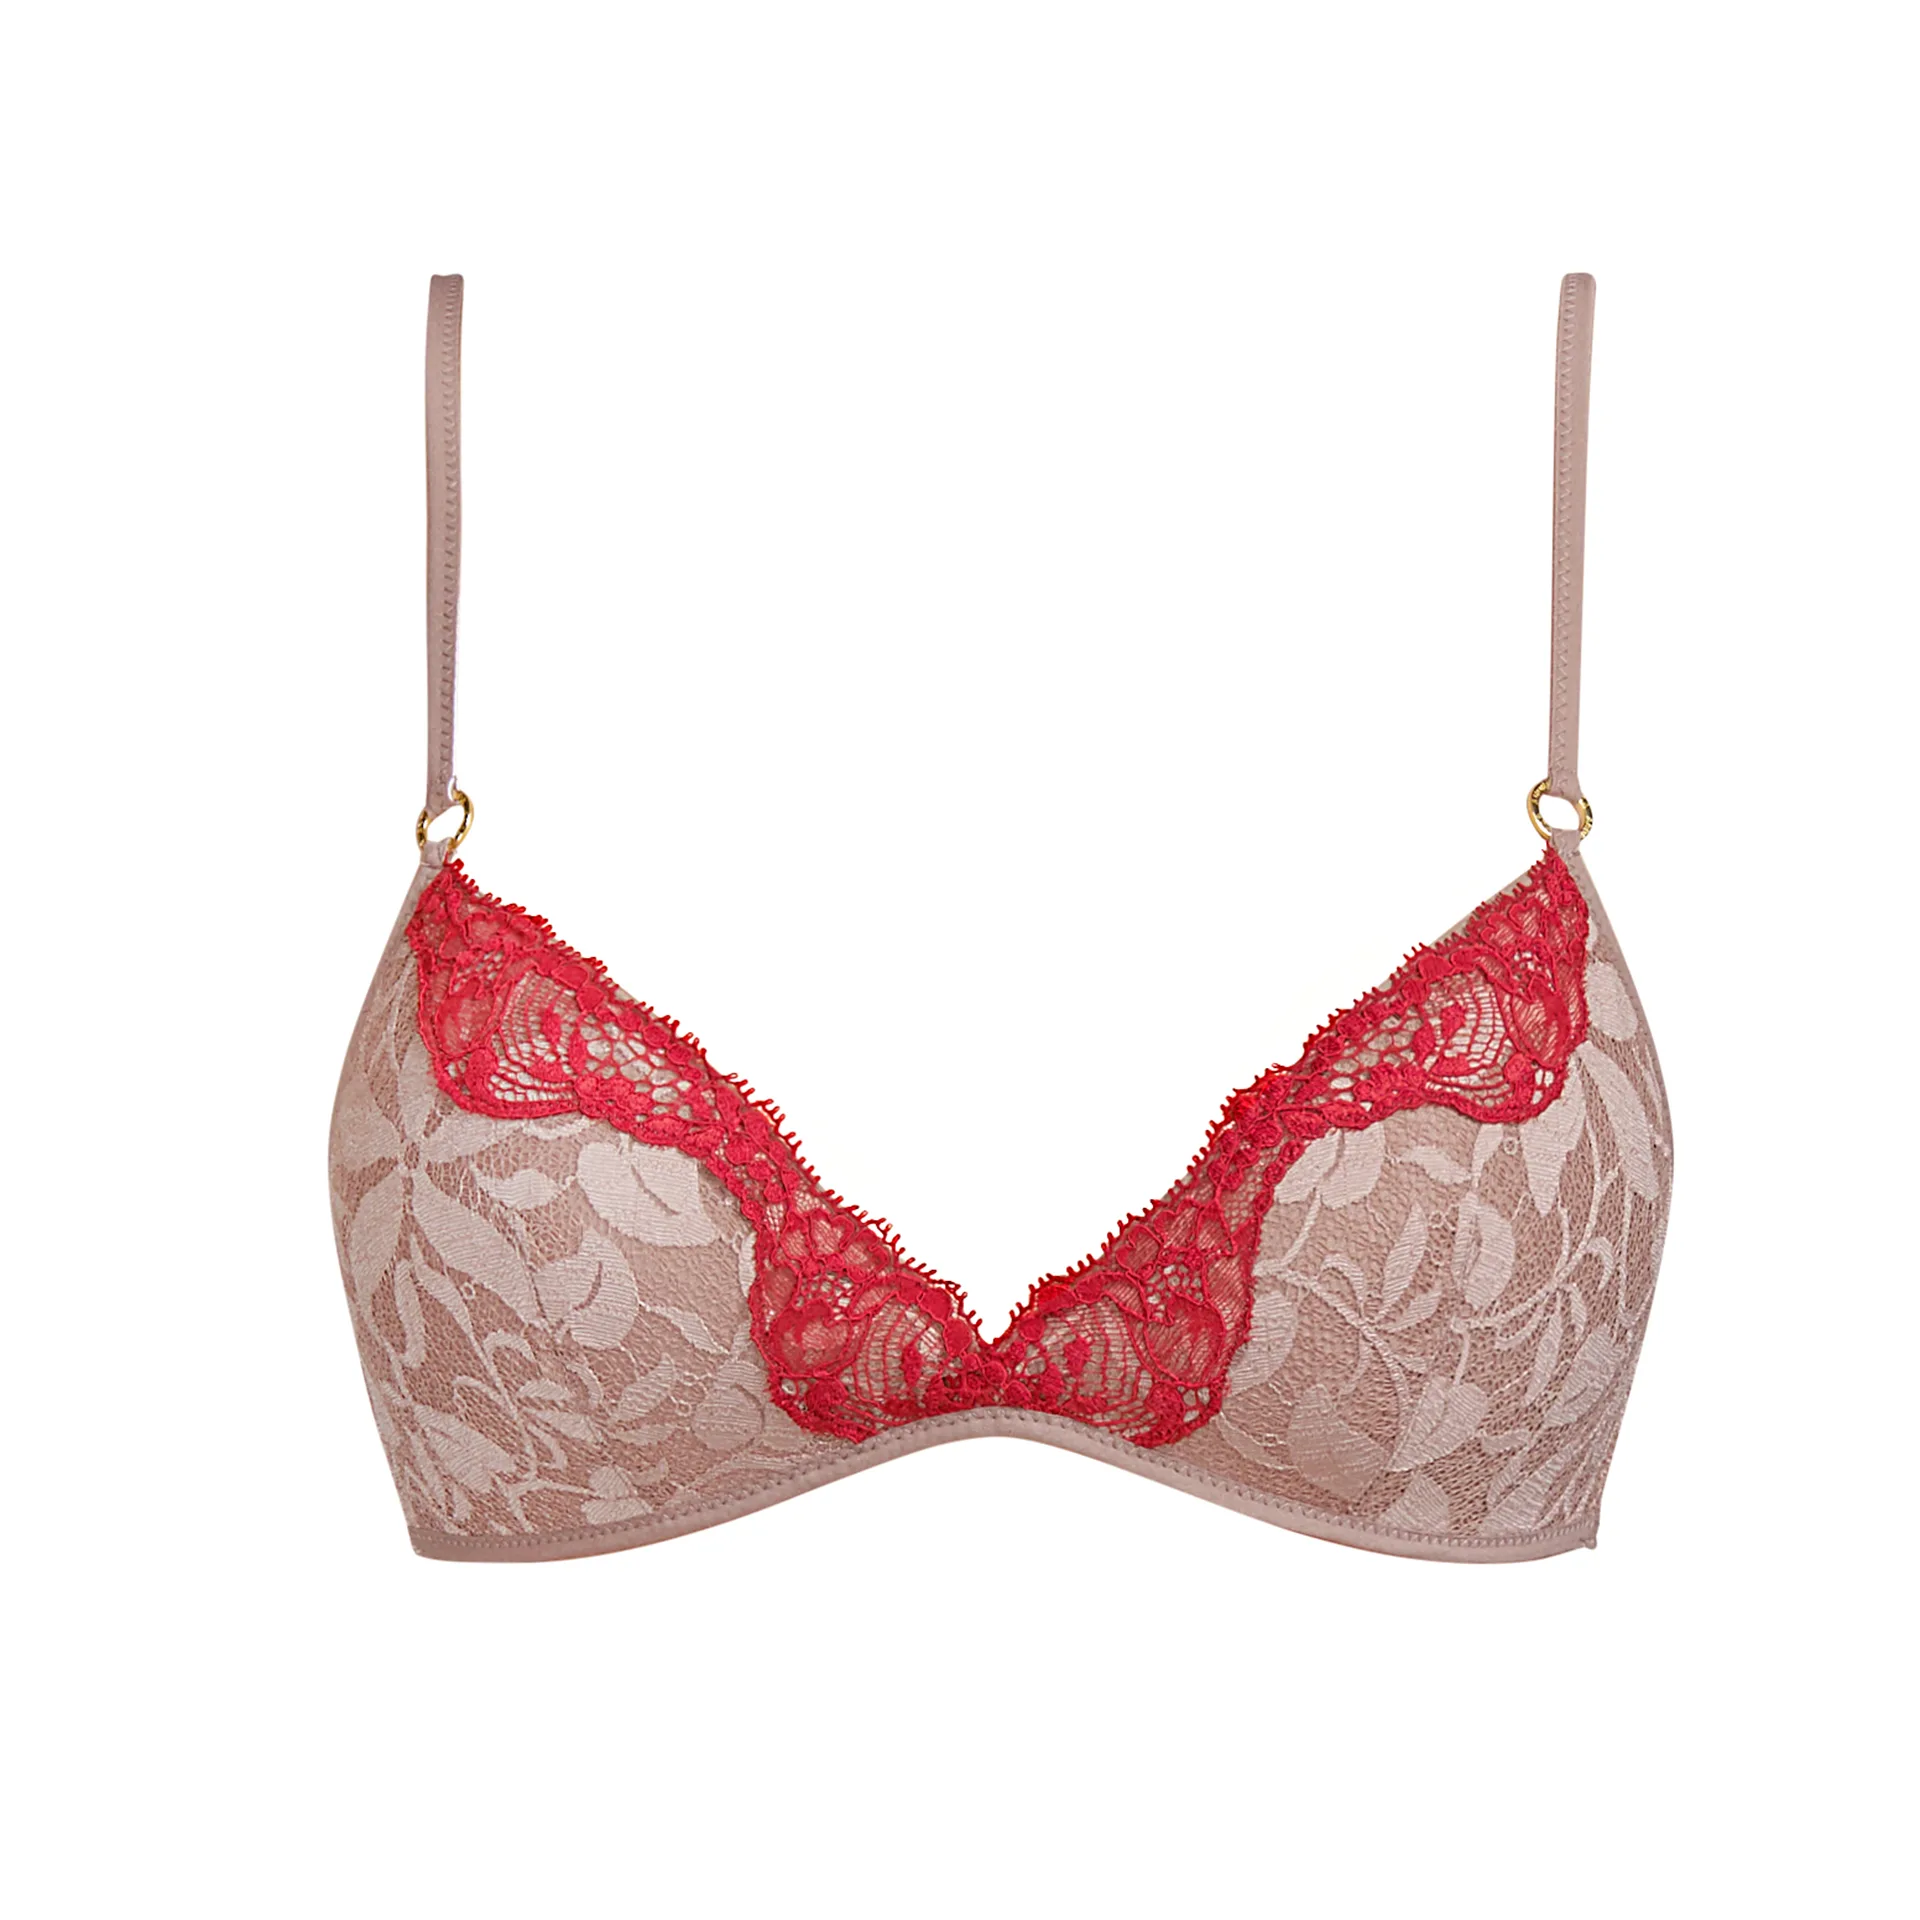 Andres Sarda Janis Make Up Full Cup Bra Wireless